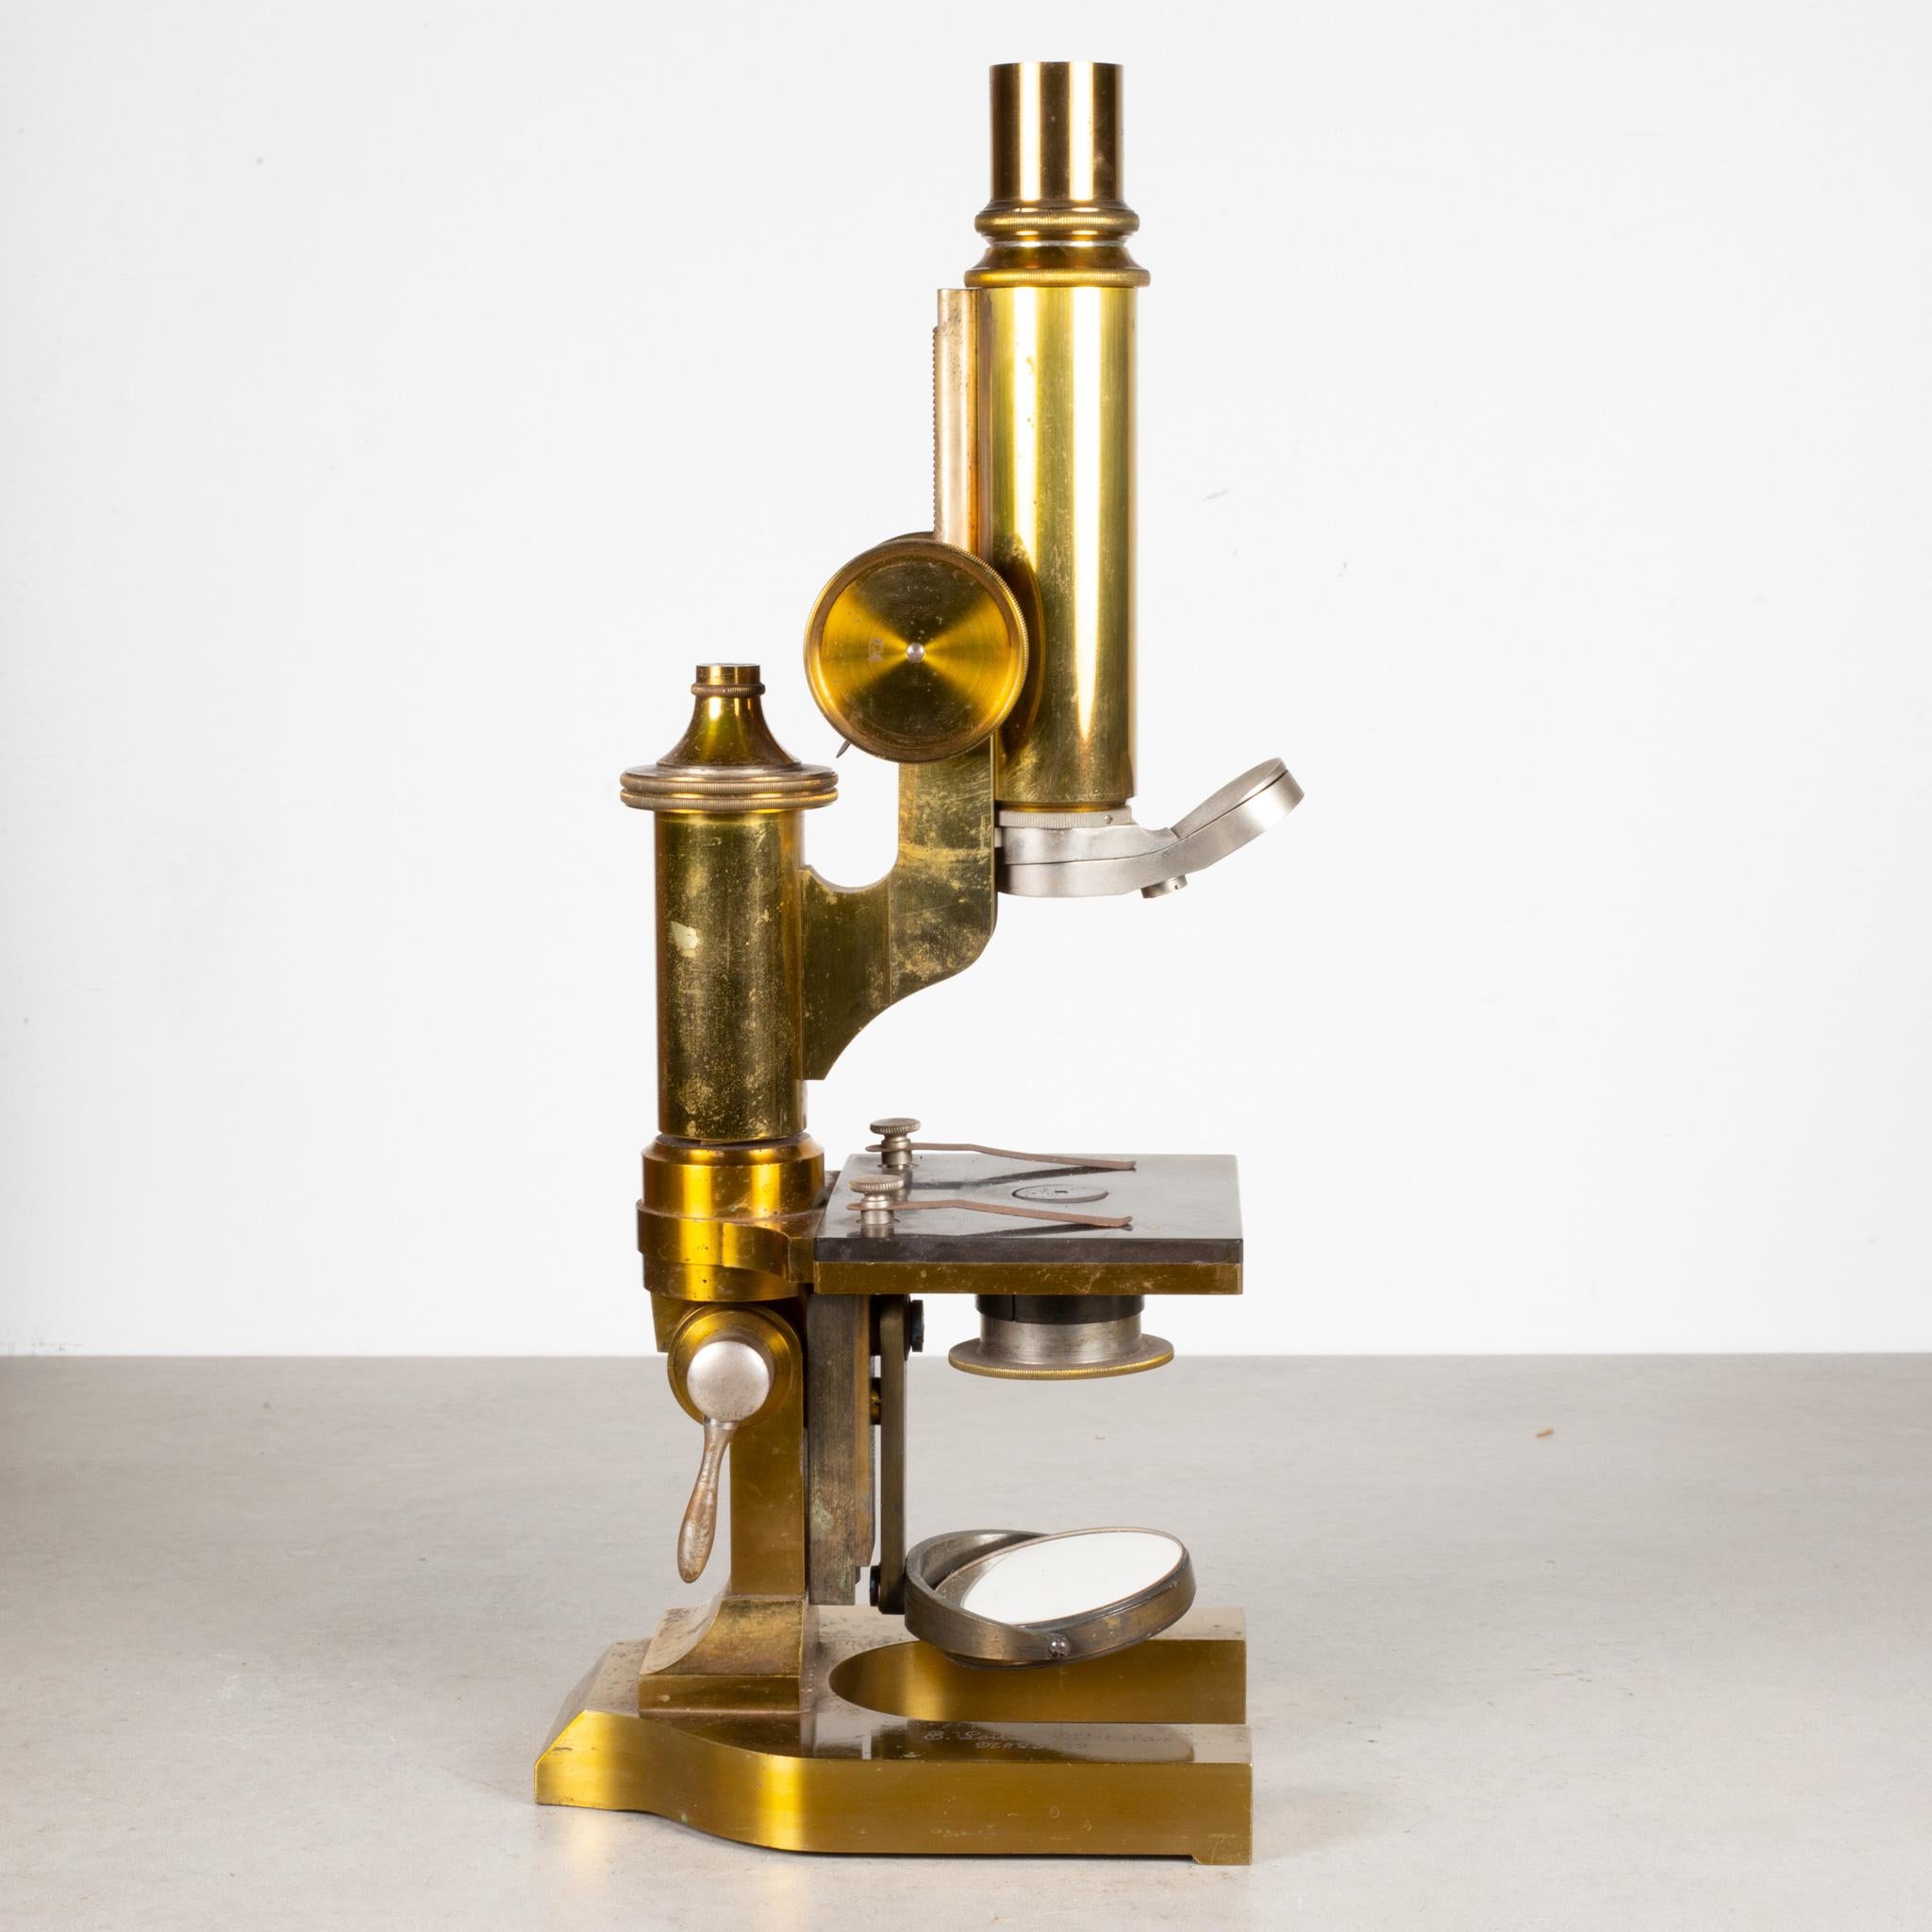 19th Century 19th C. E. Leitz Wetzlar Solid Brass Microscope and Traveling Case, c.1892